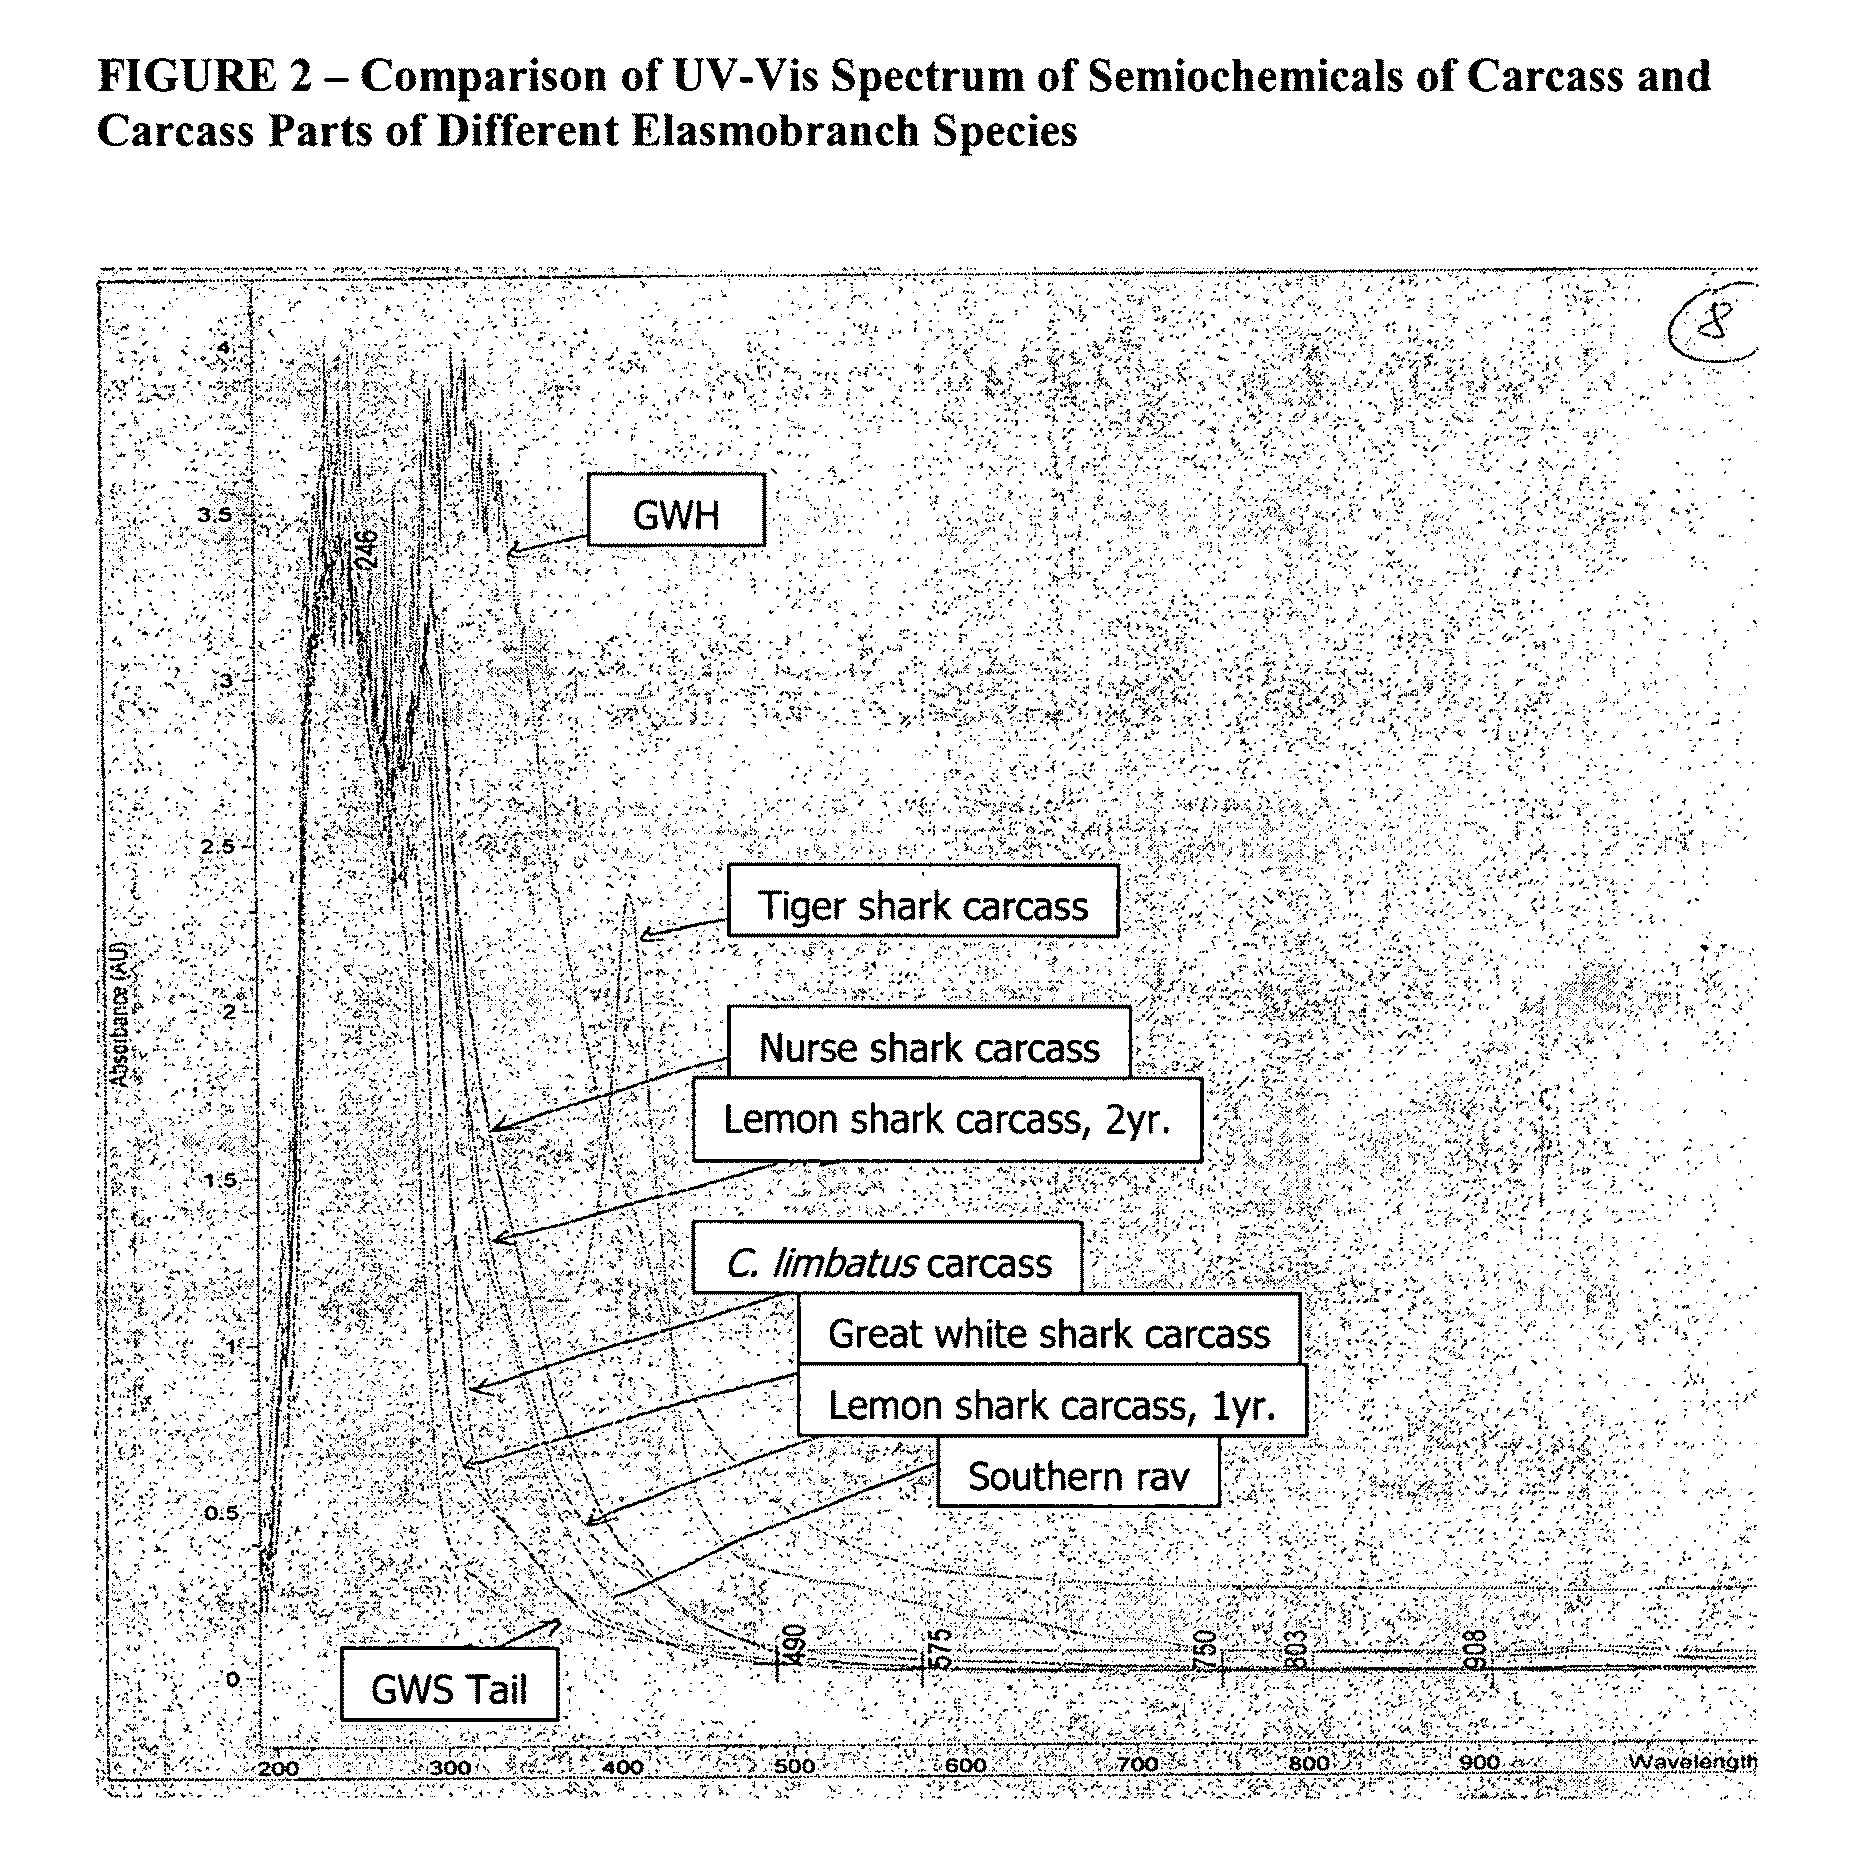 Elasmobranch-repelling compounds, methods of use and devices